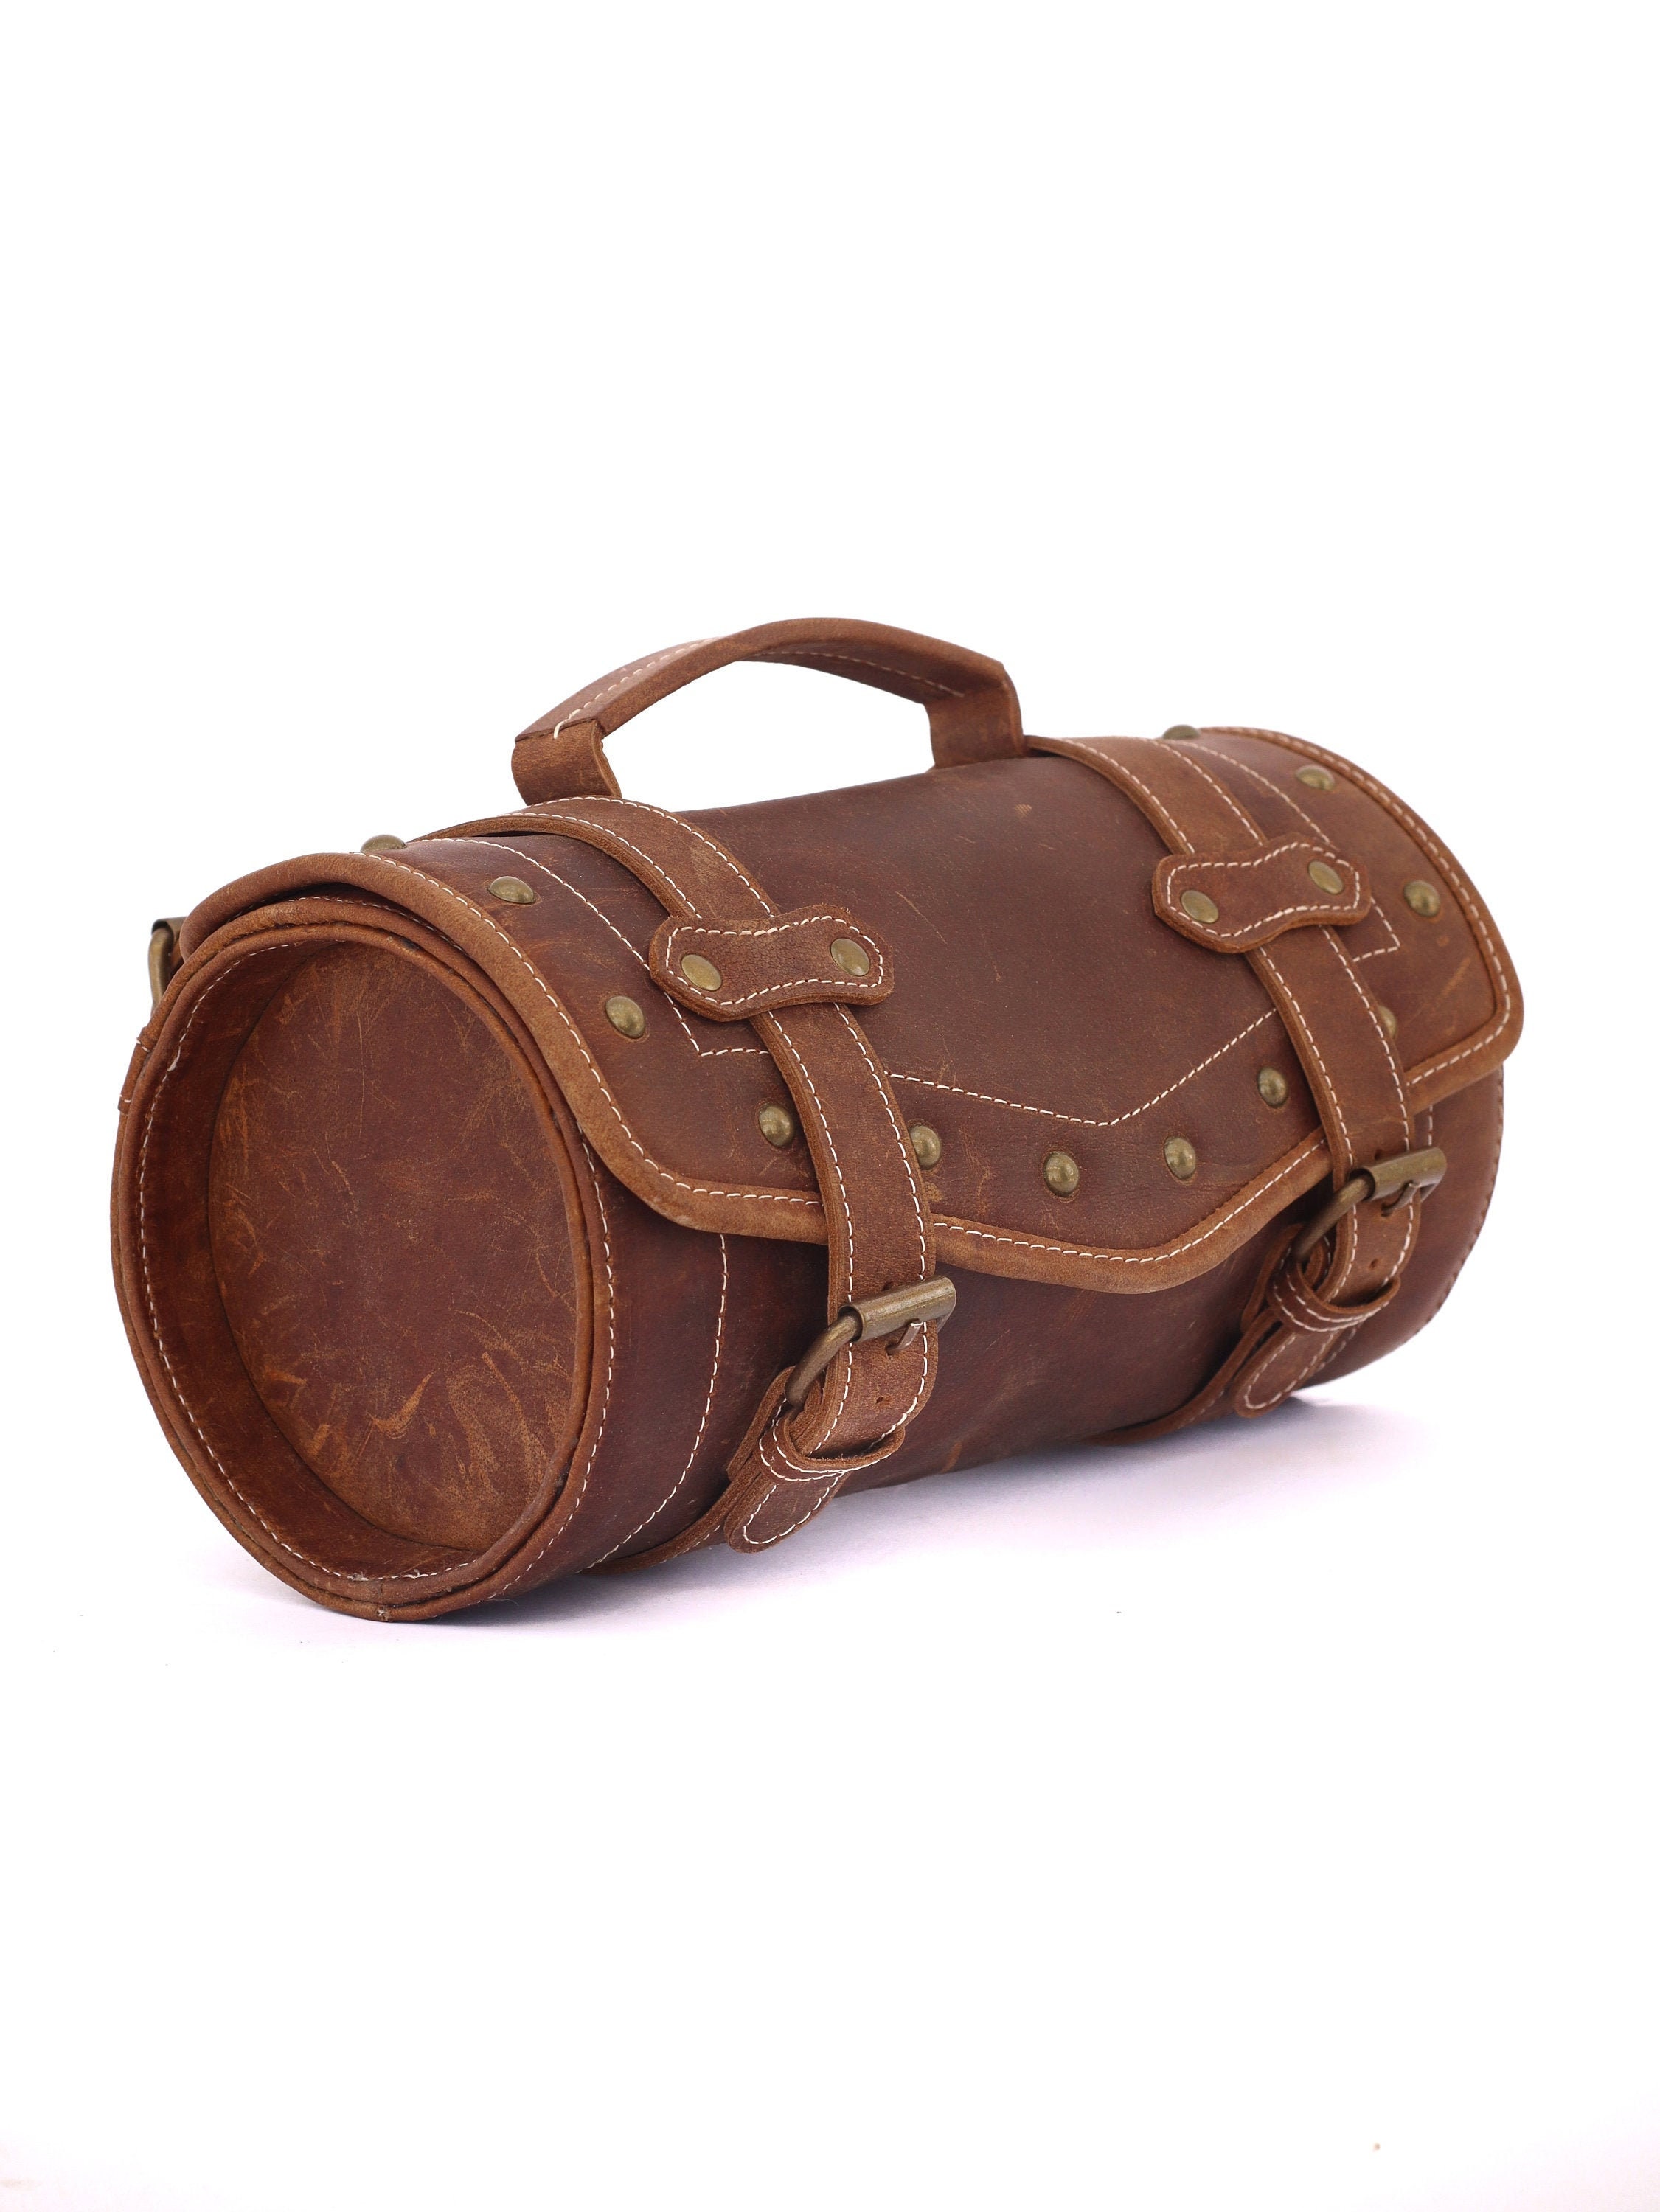 handlebar bag powersports luggage Motorcycle Saddle Bags Genuine Brown Leather roll Pouch Side fork Tool Pouch motorcycle accessories Brown 